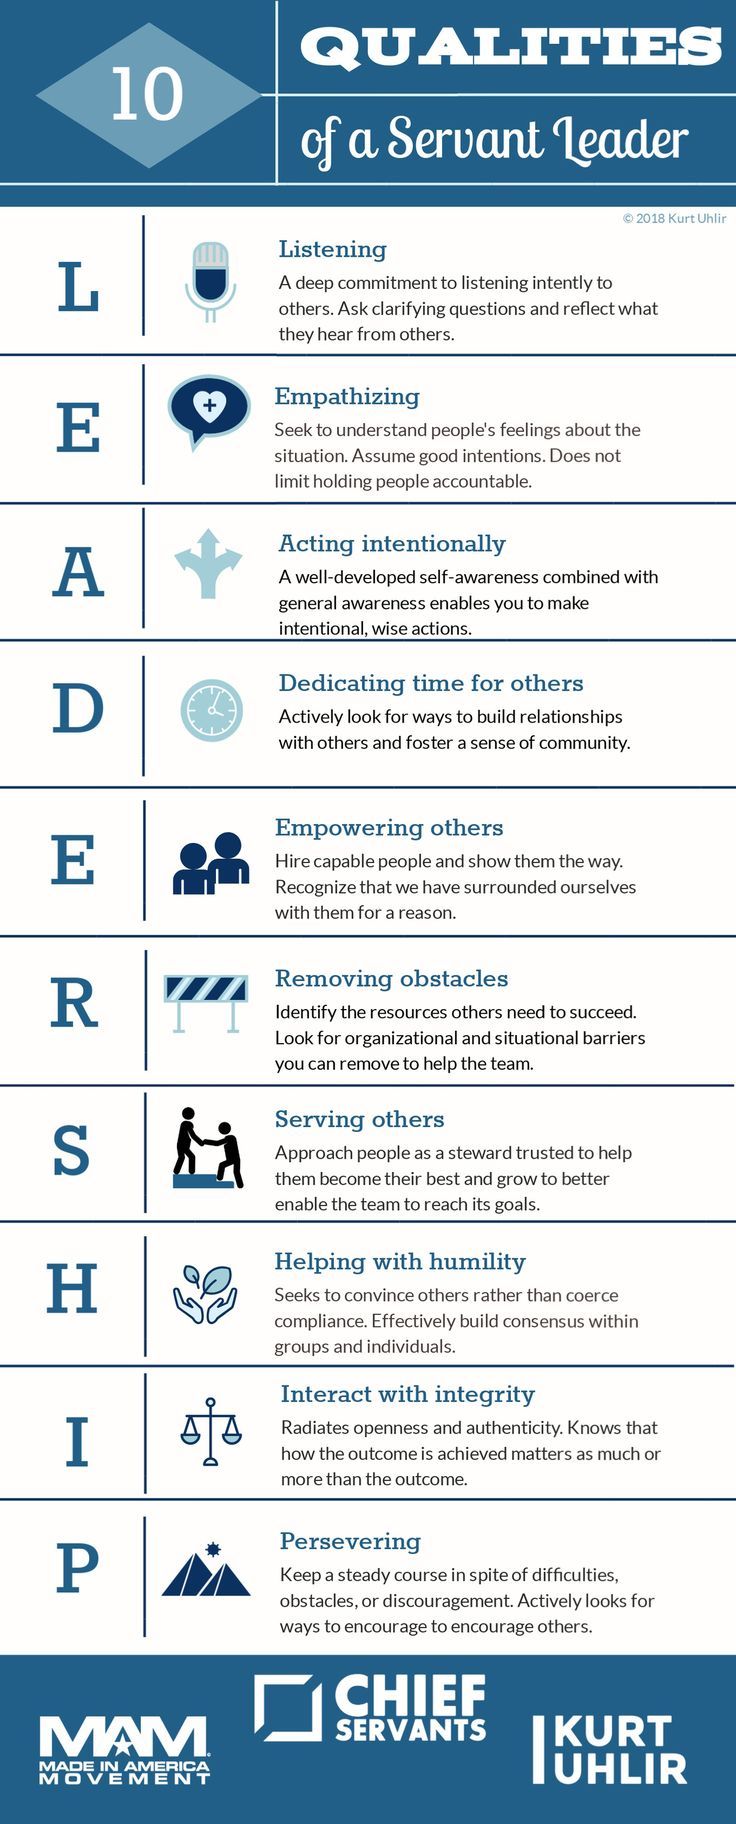 10 Qualities of a Servant Leader {Infographic}